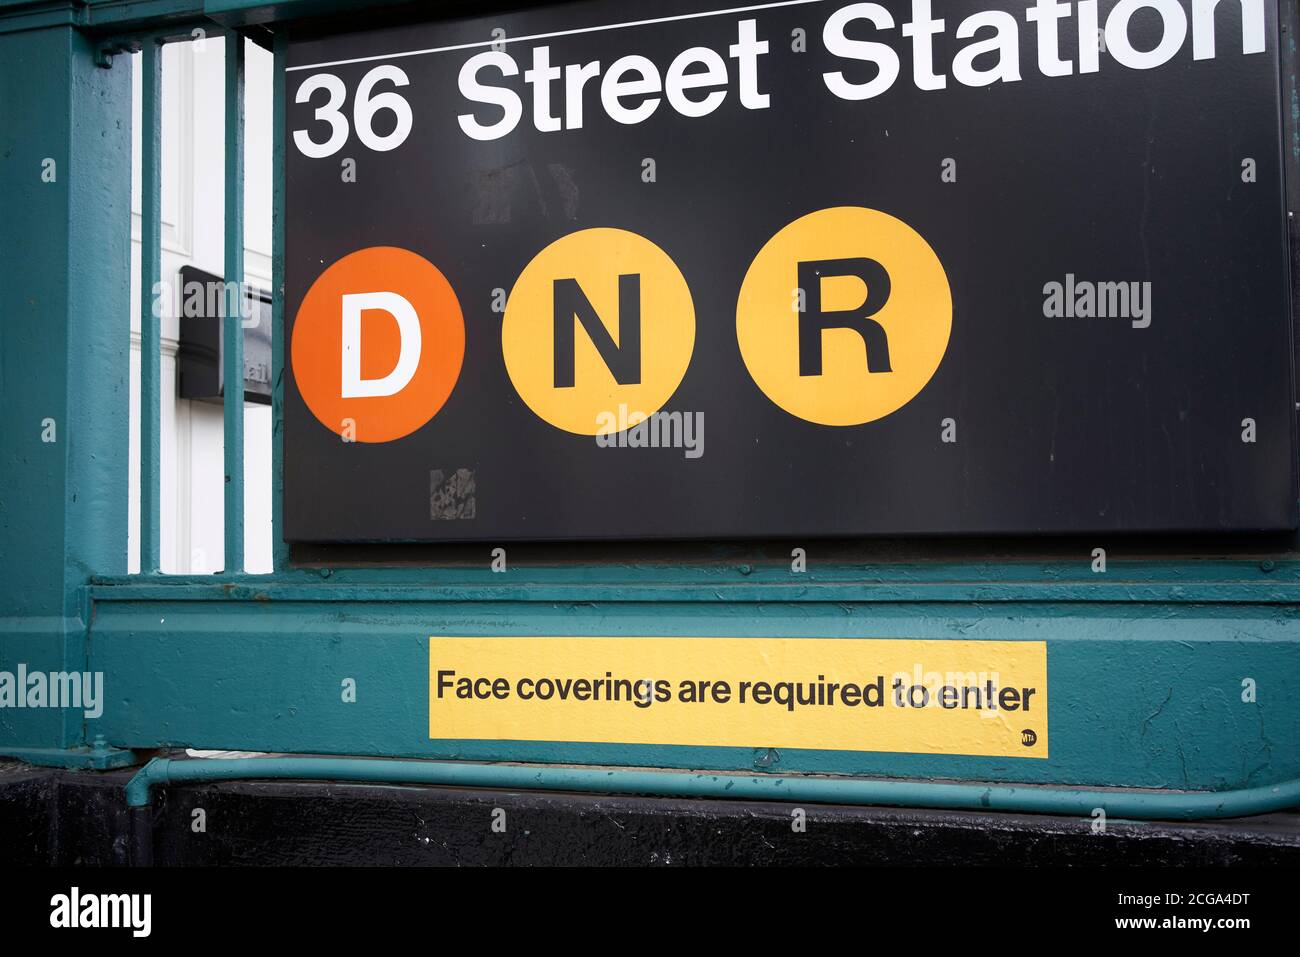 Face coverings are required to enter, covid measure signage in New York City subway. Stock Photo